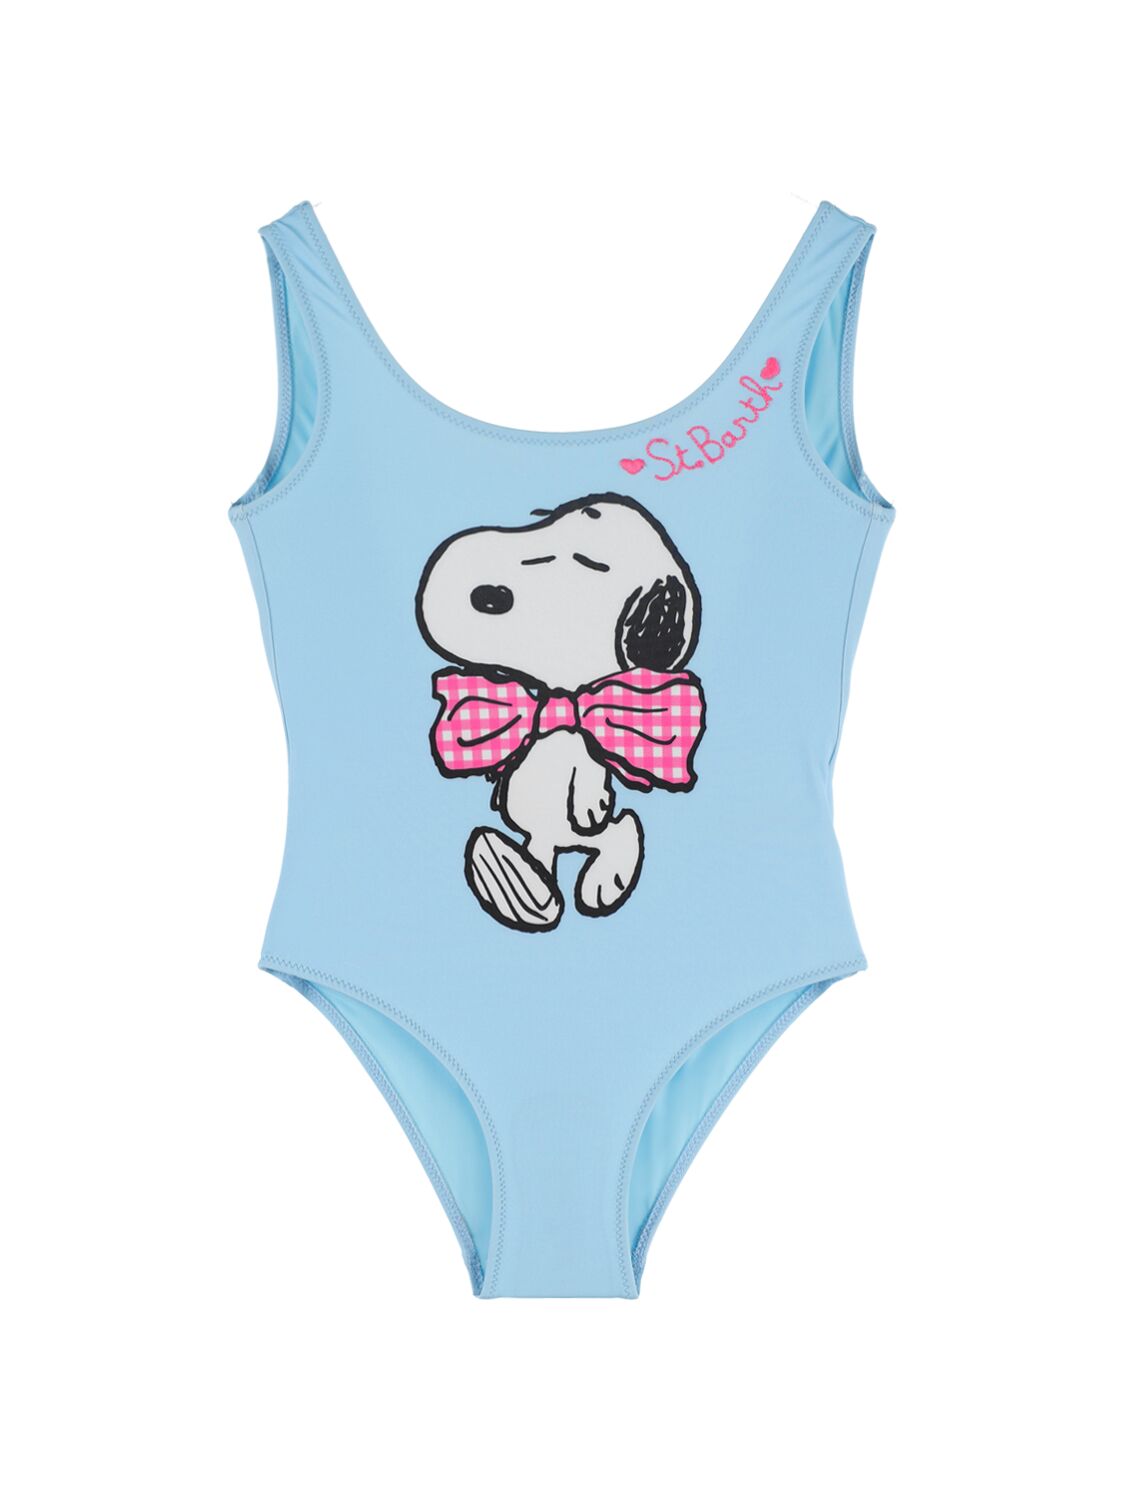 Snoopy Print One Piece Swimsuit – KIDS-GIRLS > CLOTHING > SWIMWEAR & COVER-UPS